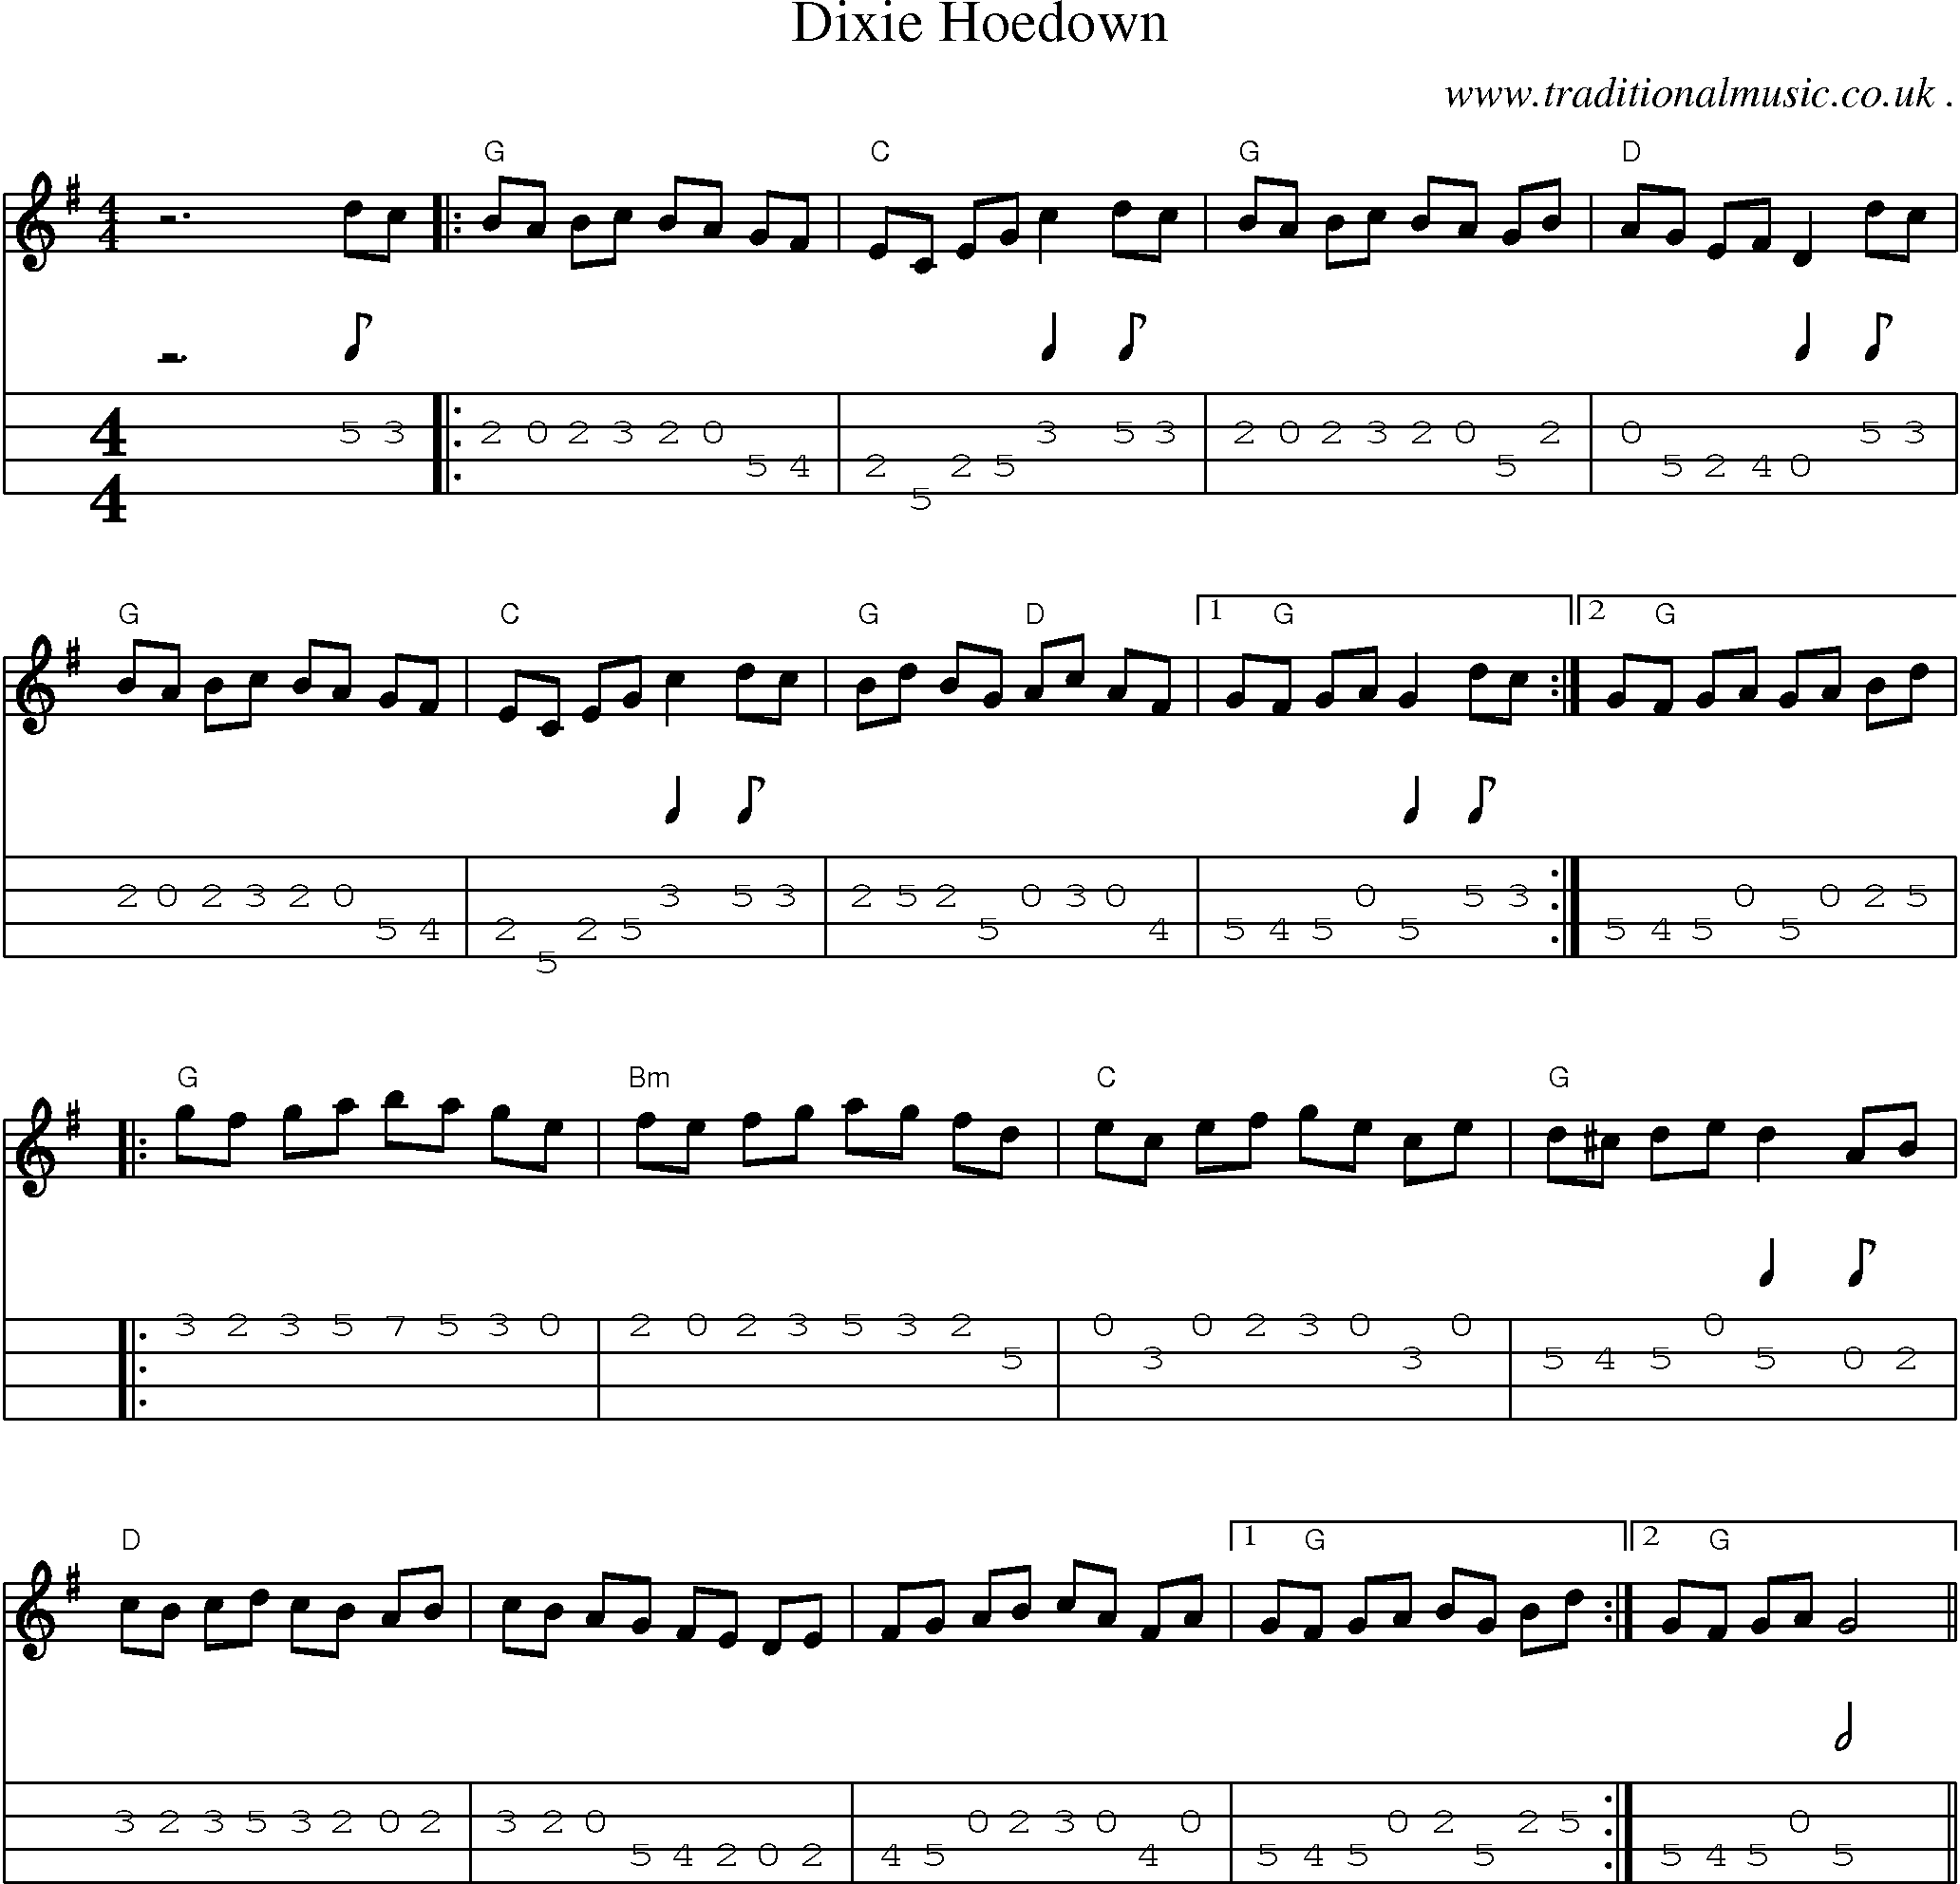 Music Score and Mandolin Tabs for Dixie Hoedown